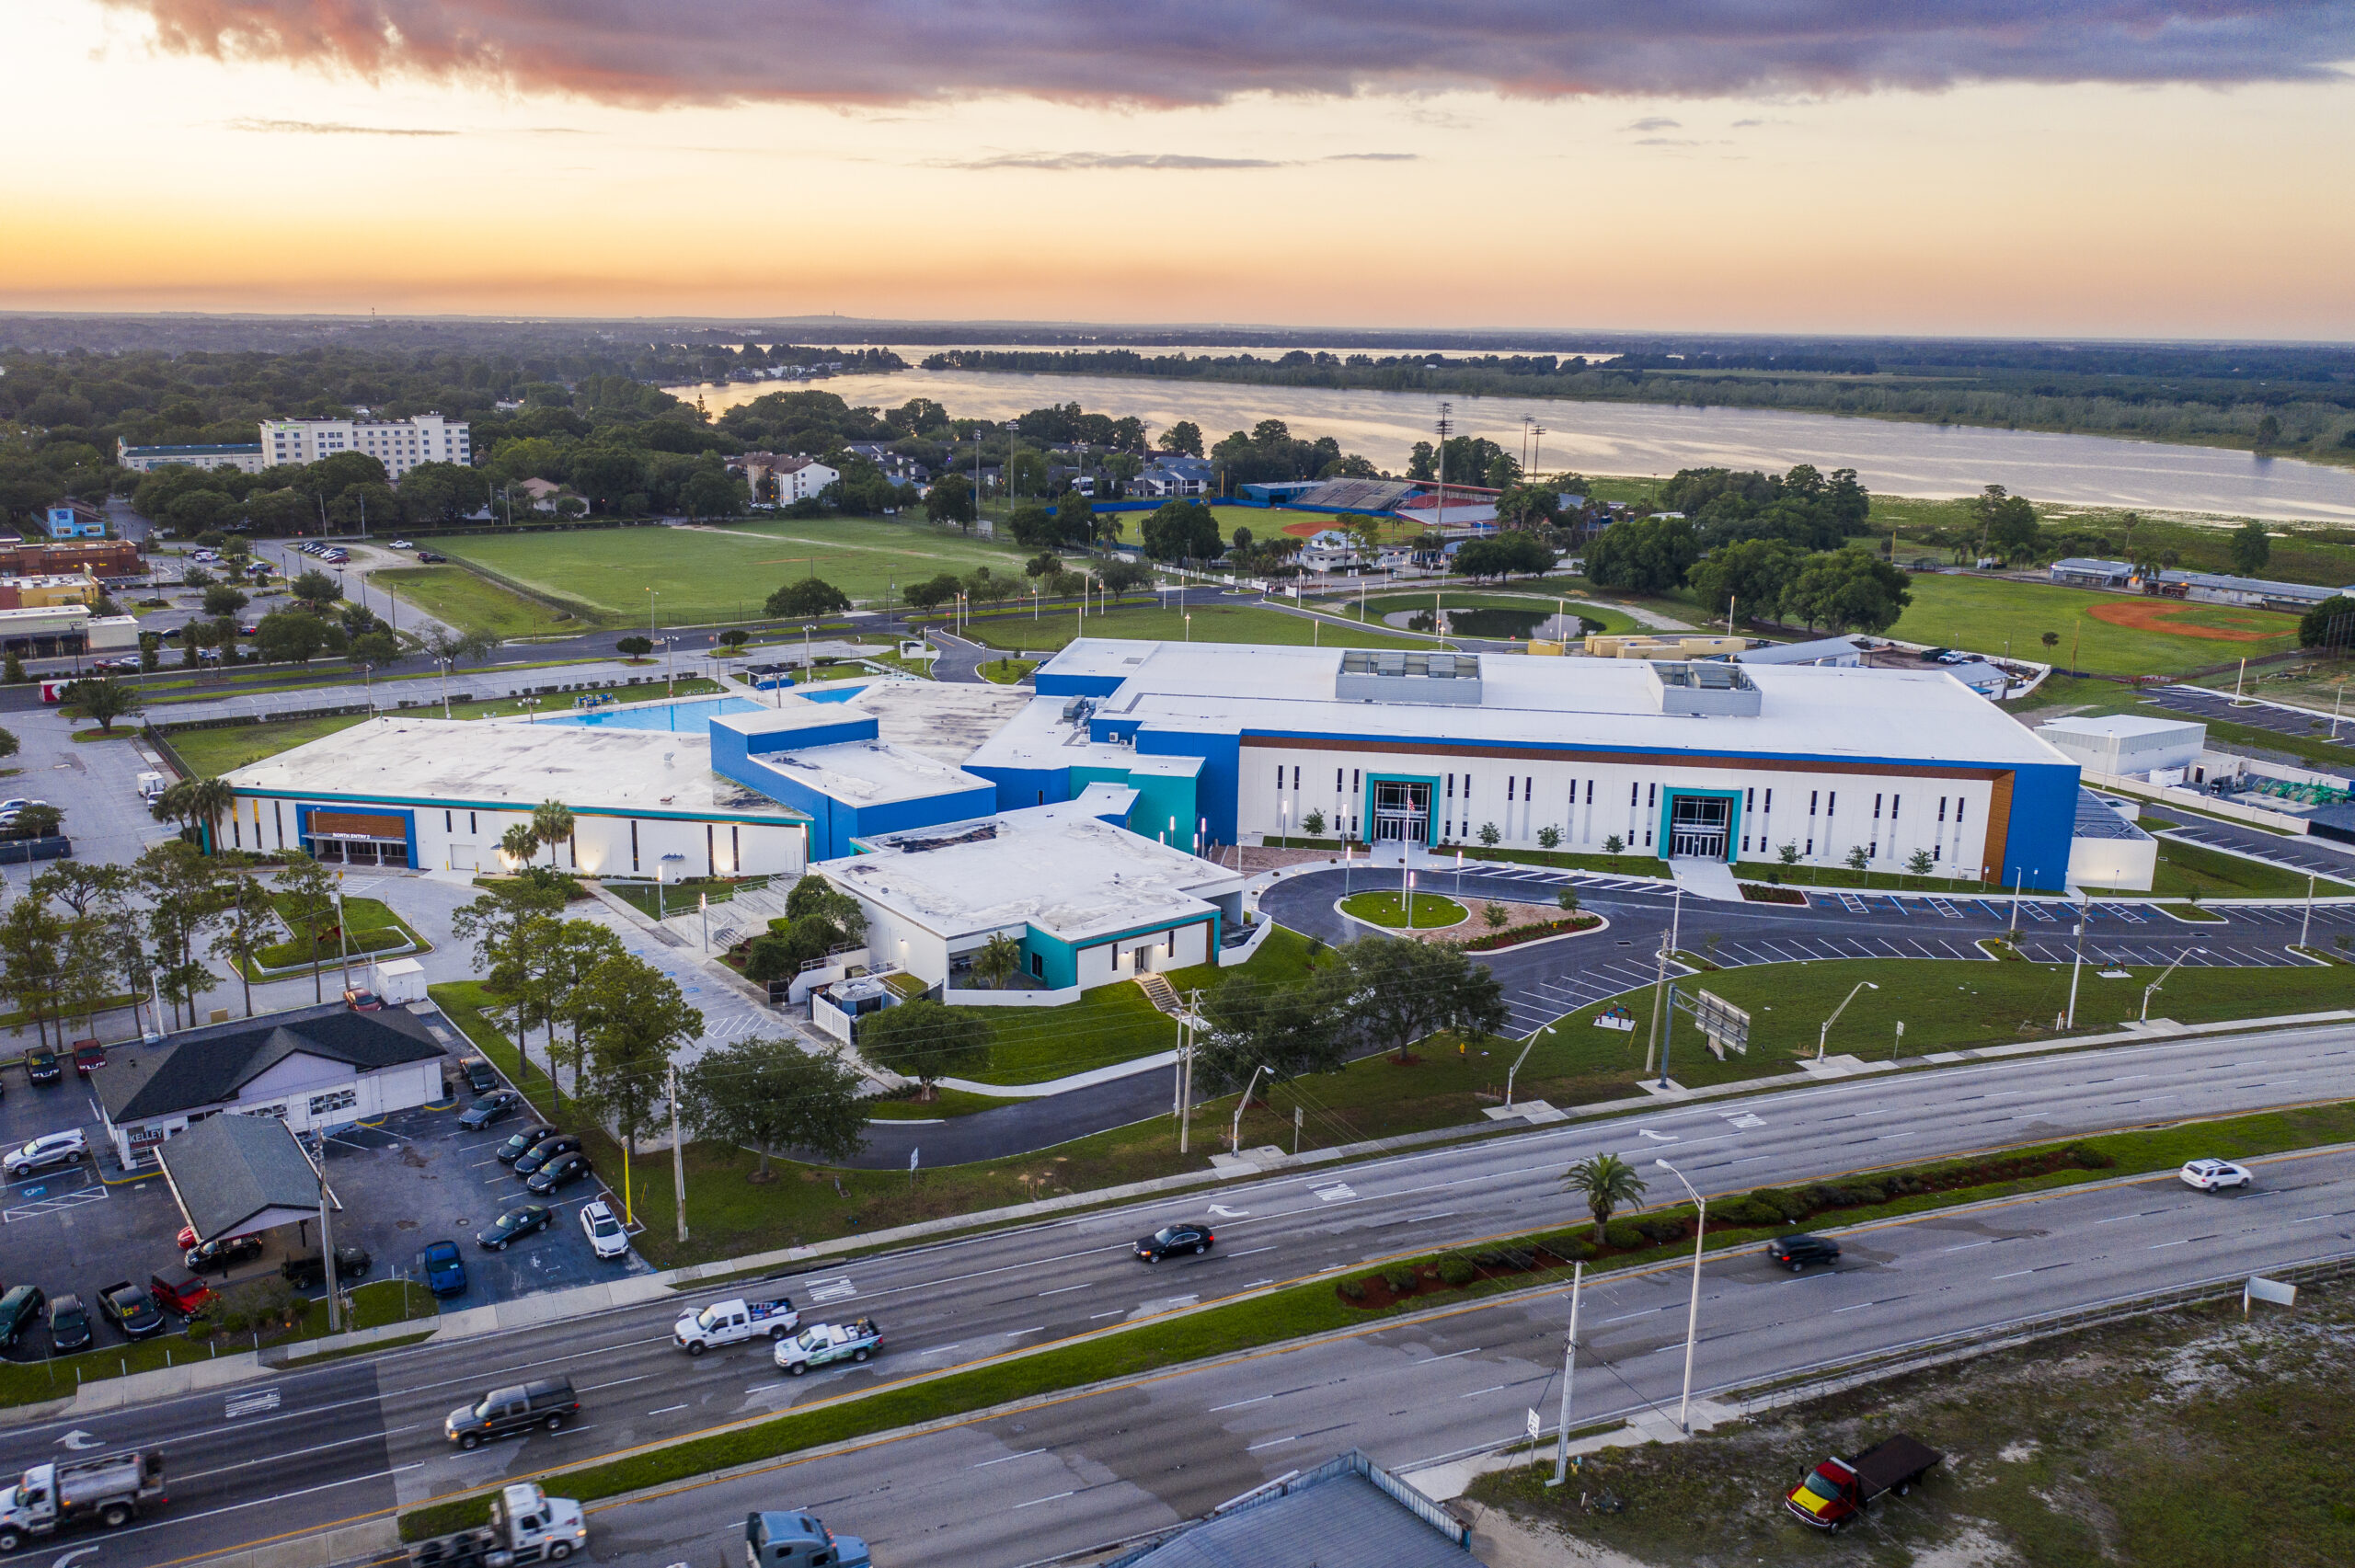 Aerial image of the AdventHealth Fieldhouse in Winter Haven